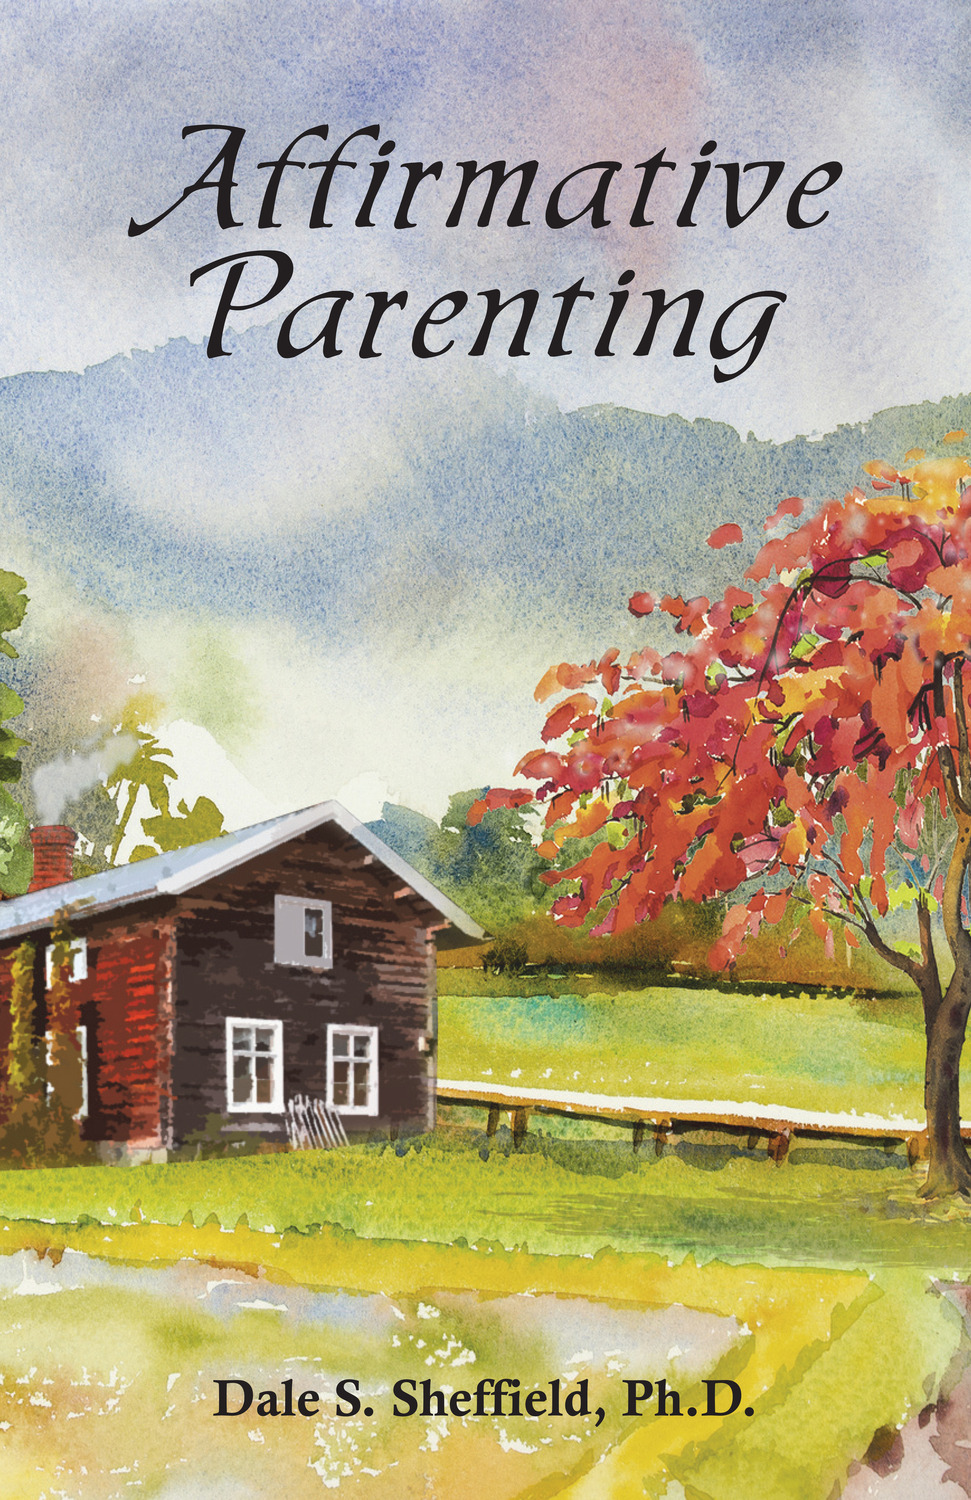 Gallery Photo of Affirmative Parenting - Available on Amazon